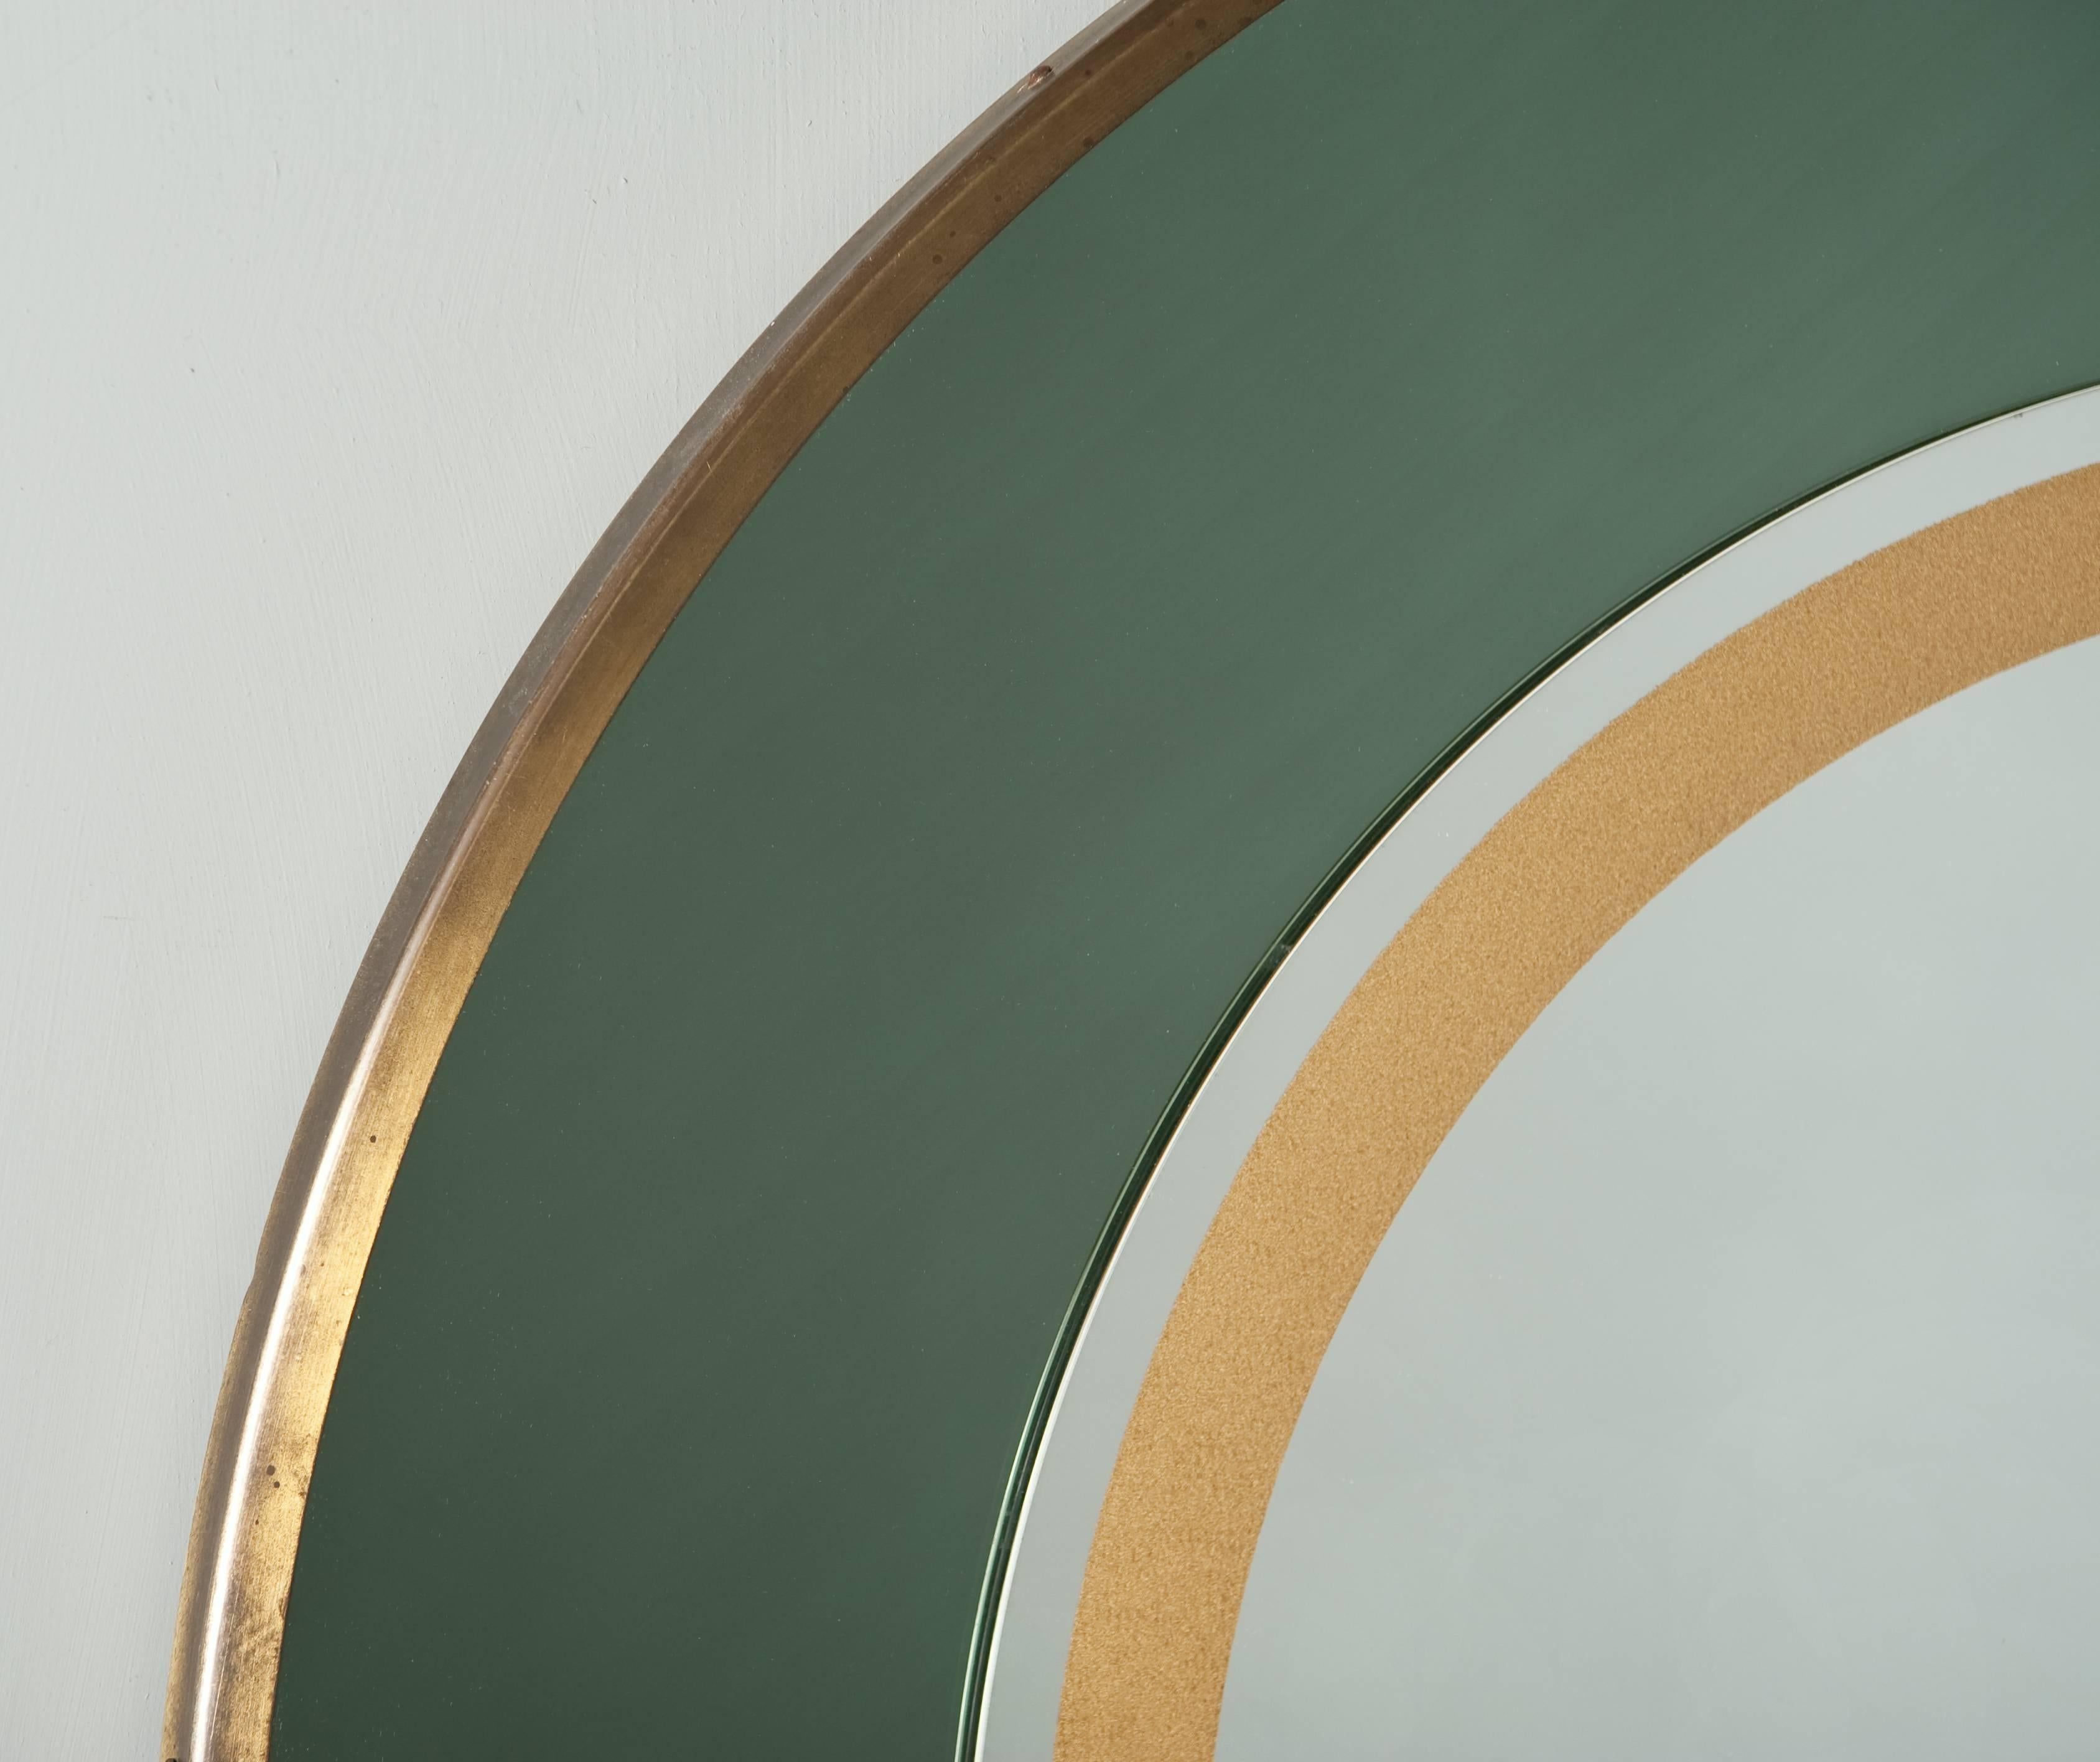 Very nice round green and gold mirror, with brass frame.